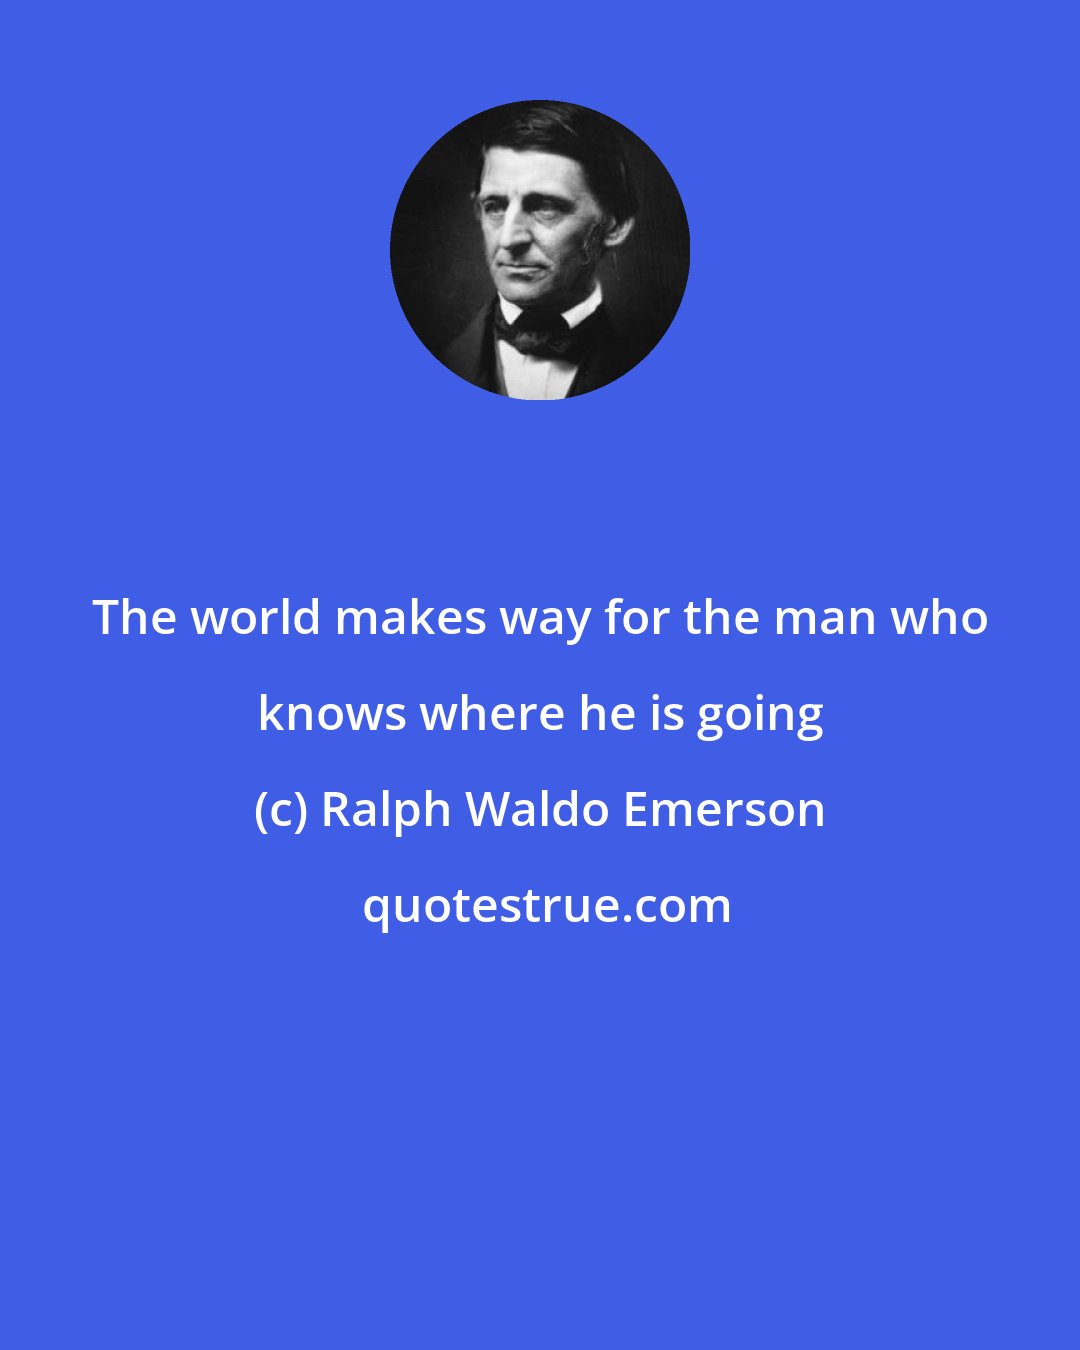 Ralph Waldo Emerson: The world makes way for the man who knows where he is going